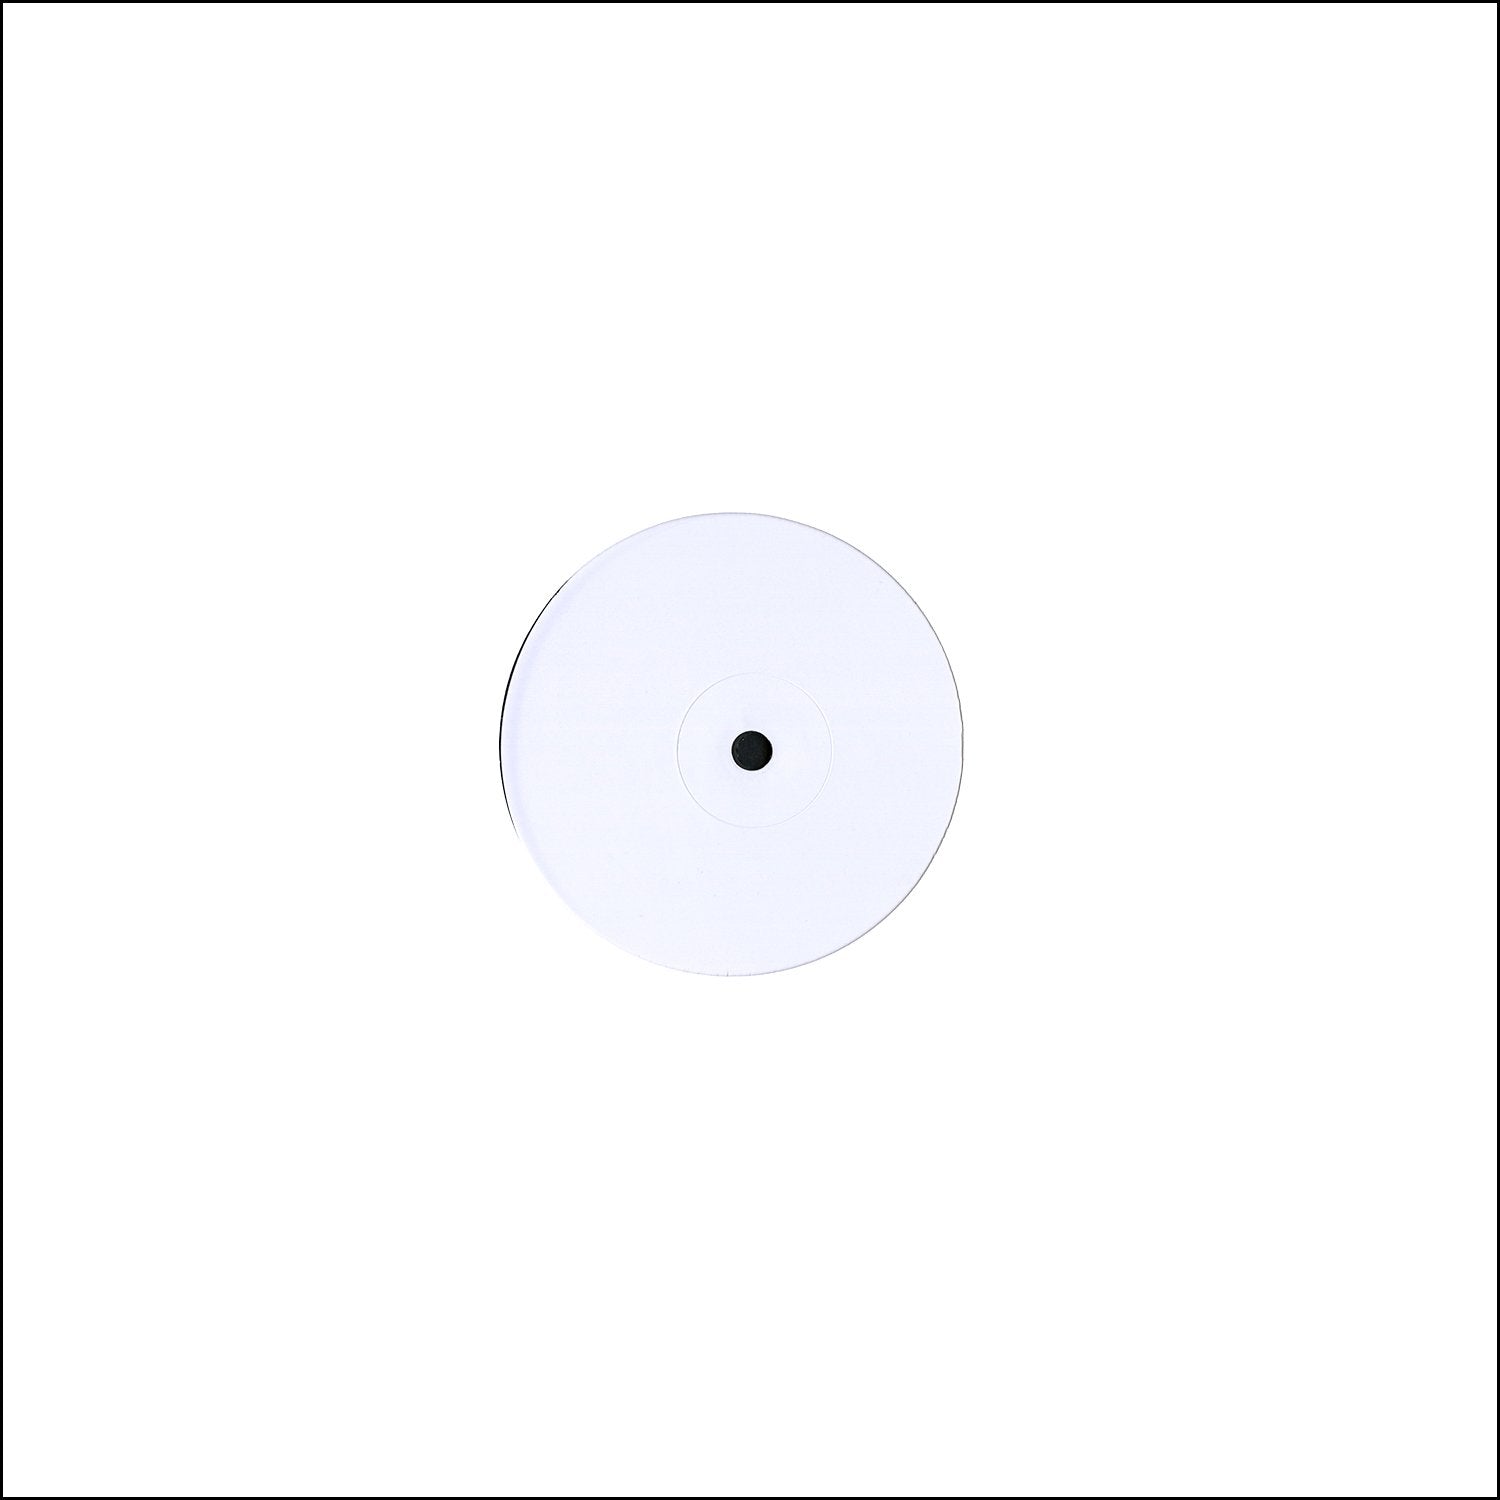 Turn On, Tune In [Test Pressing]